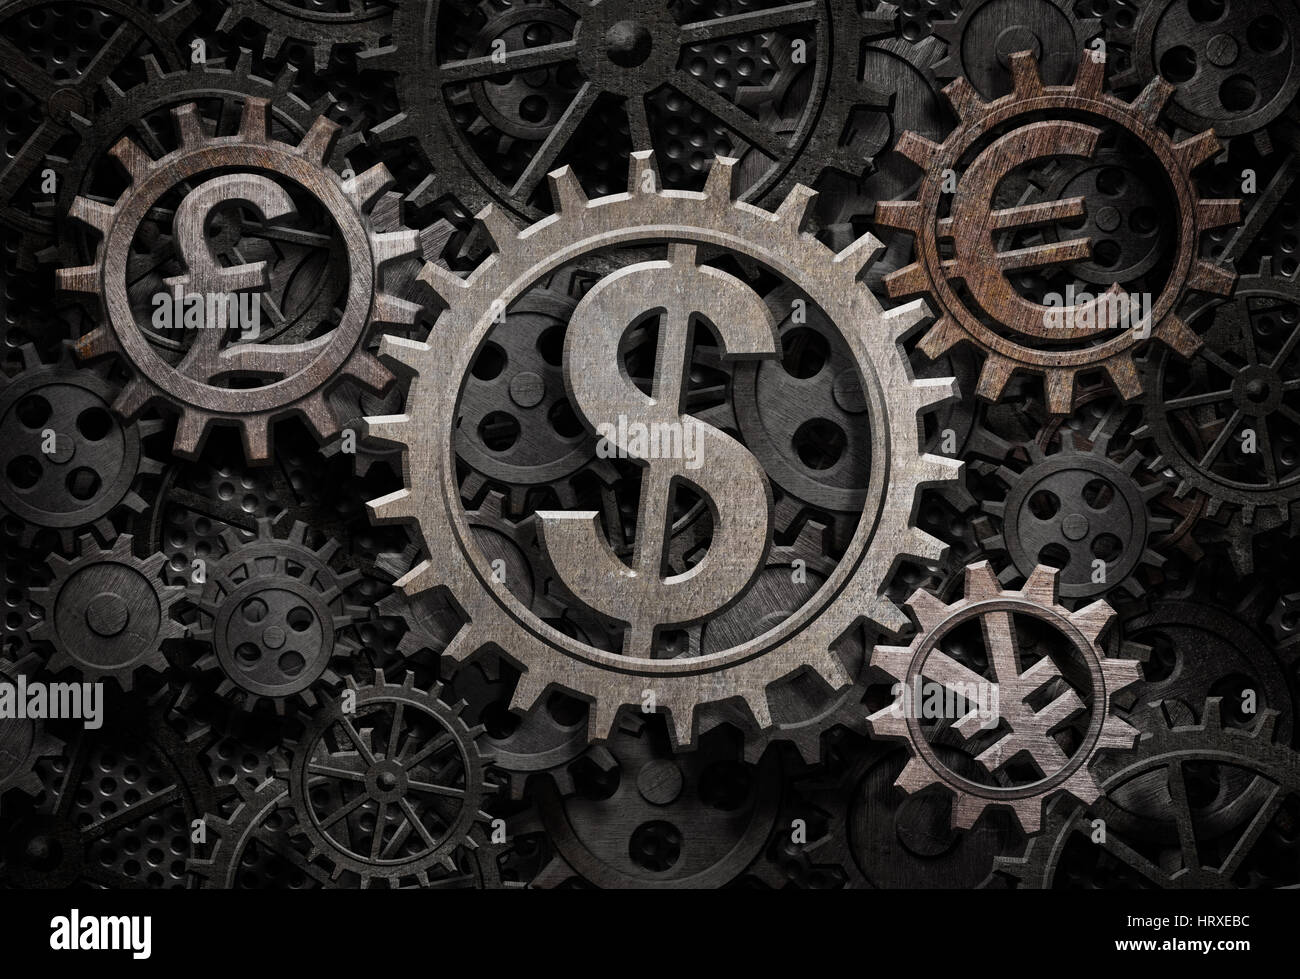 main currencies working and rotating gears 3d illustration Stock Photo